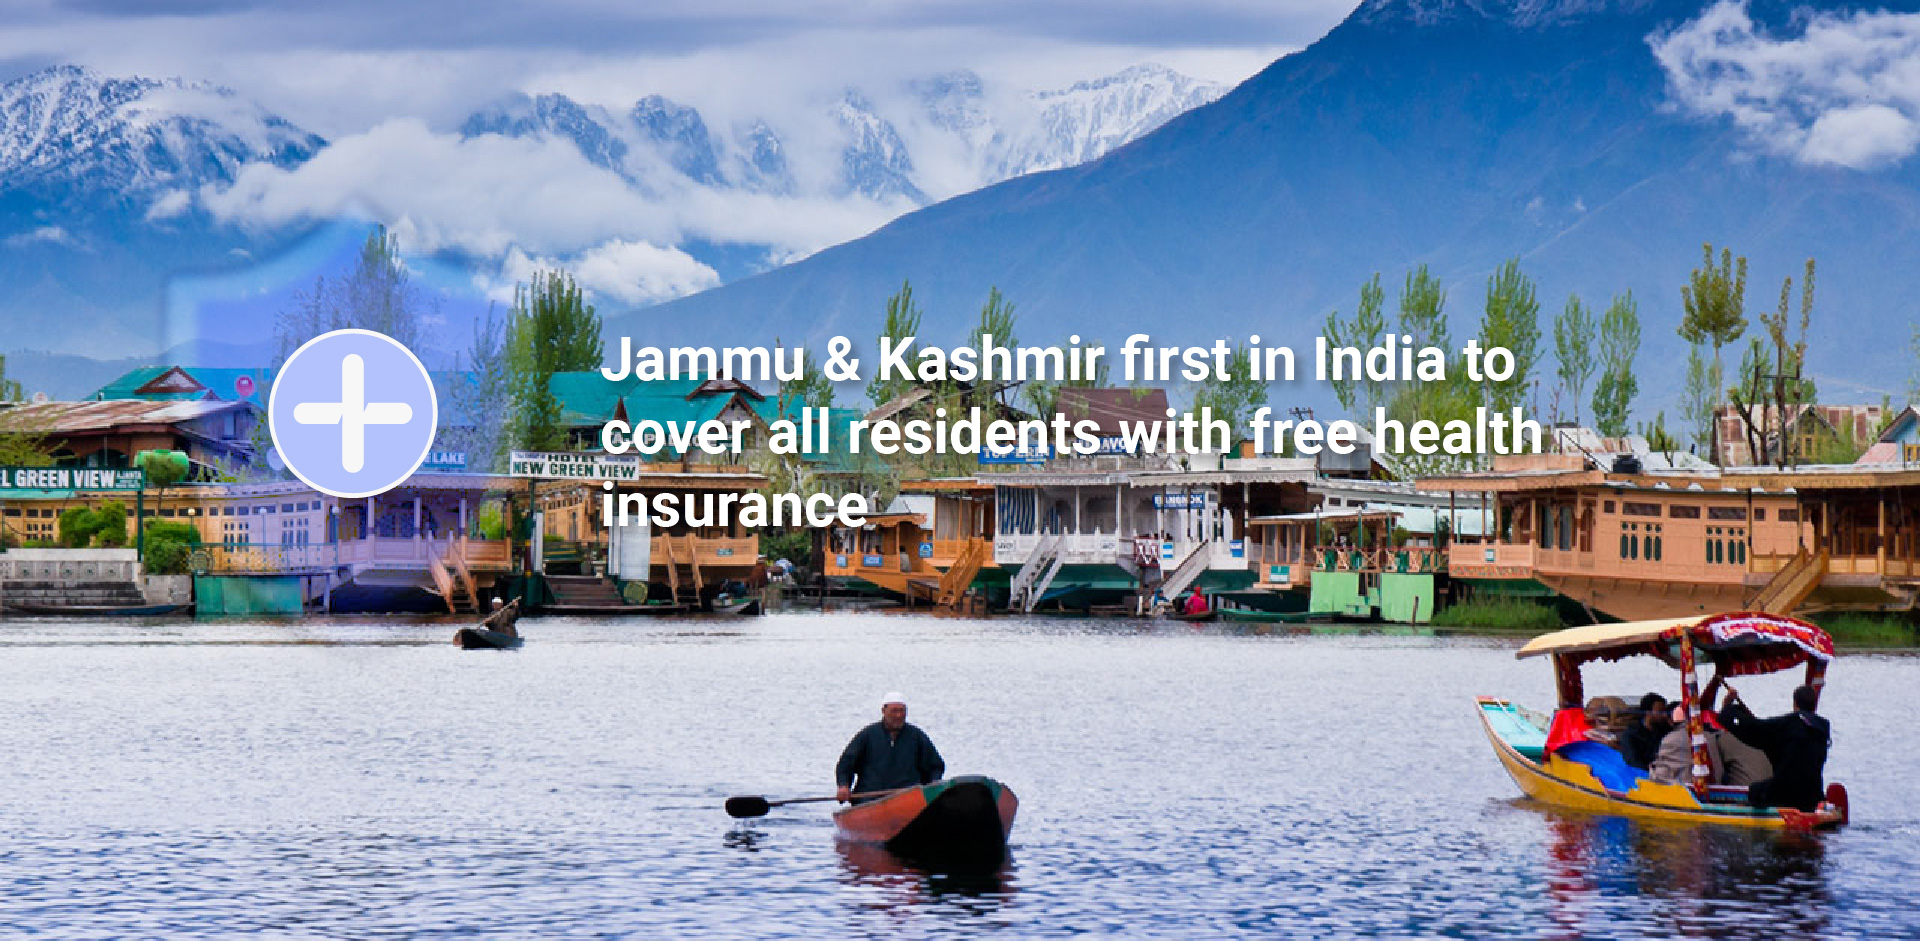 Jammu & Kashmir first in India to cover all residents with free health insurance